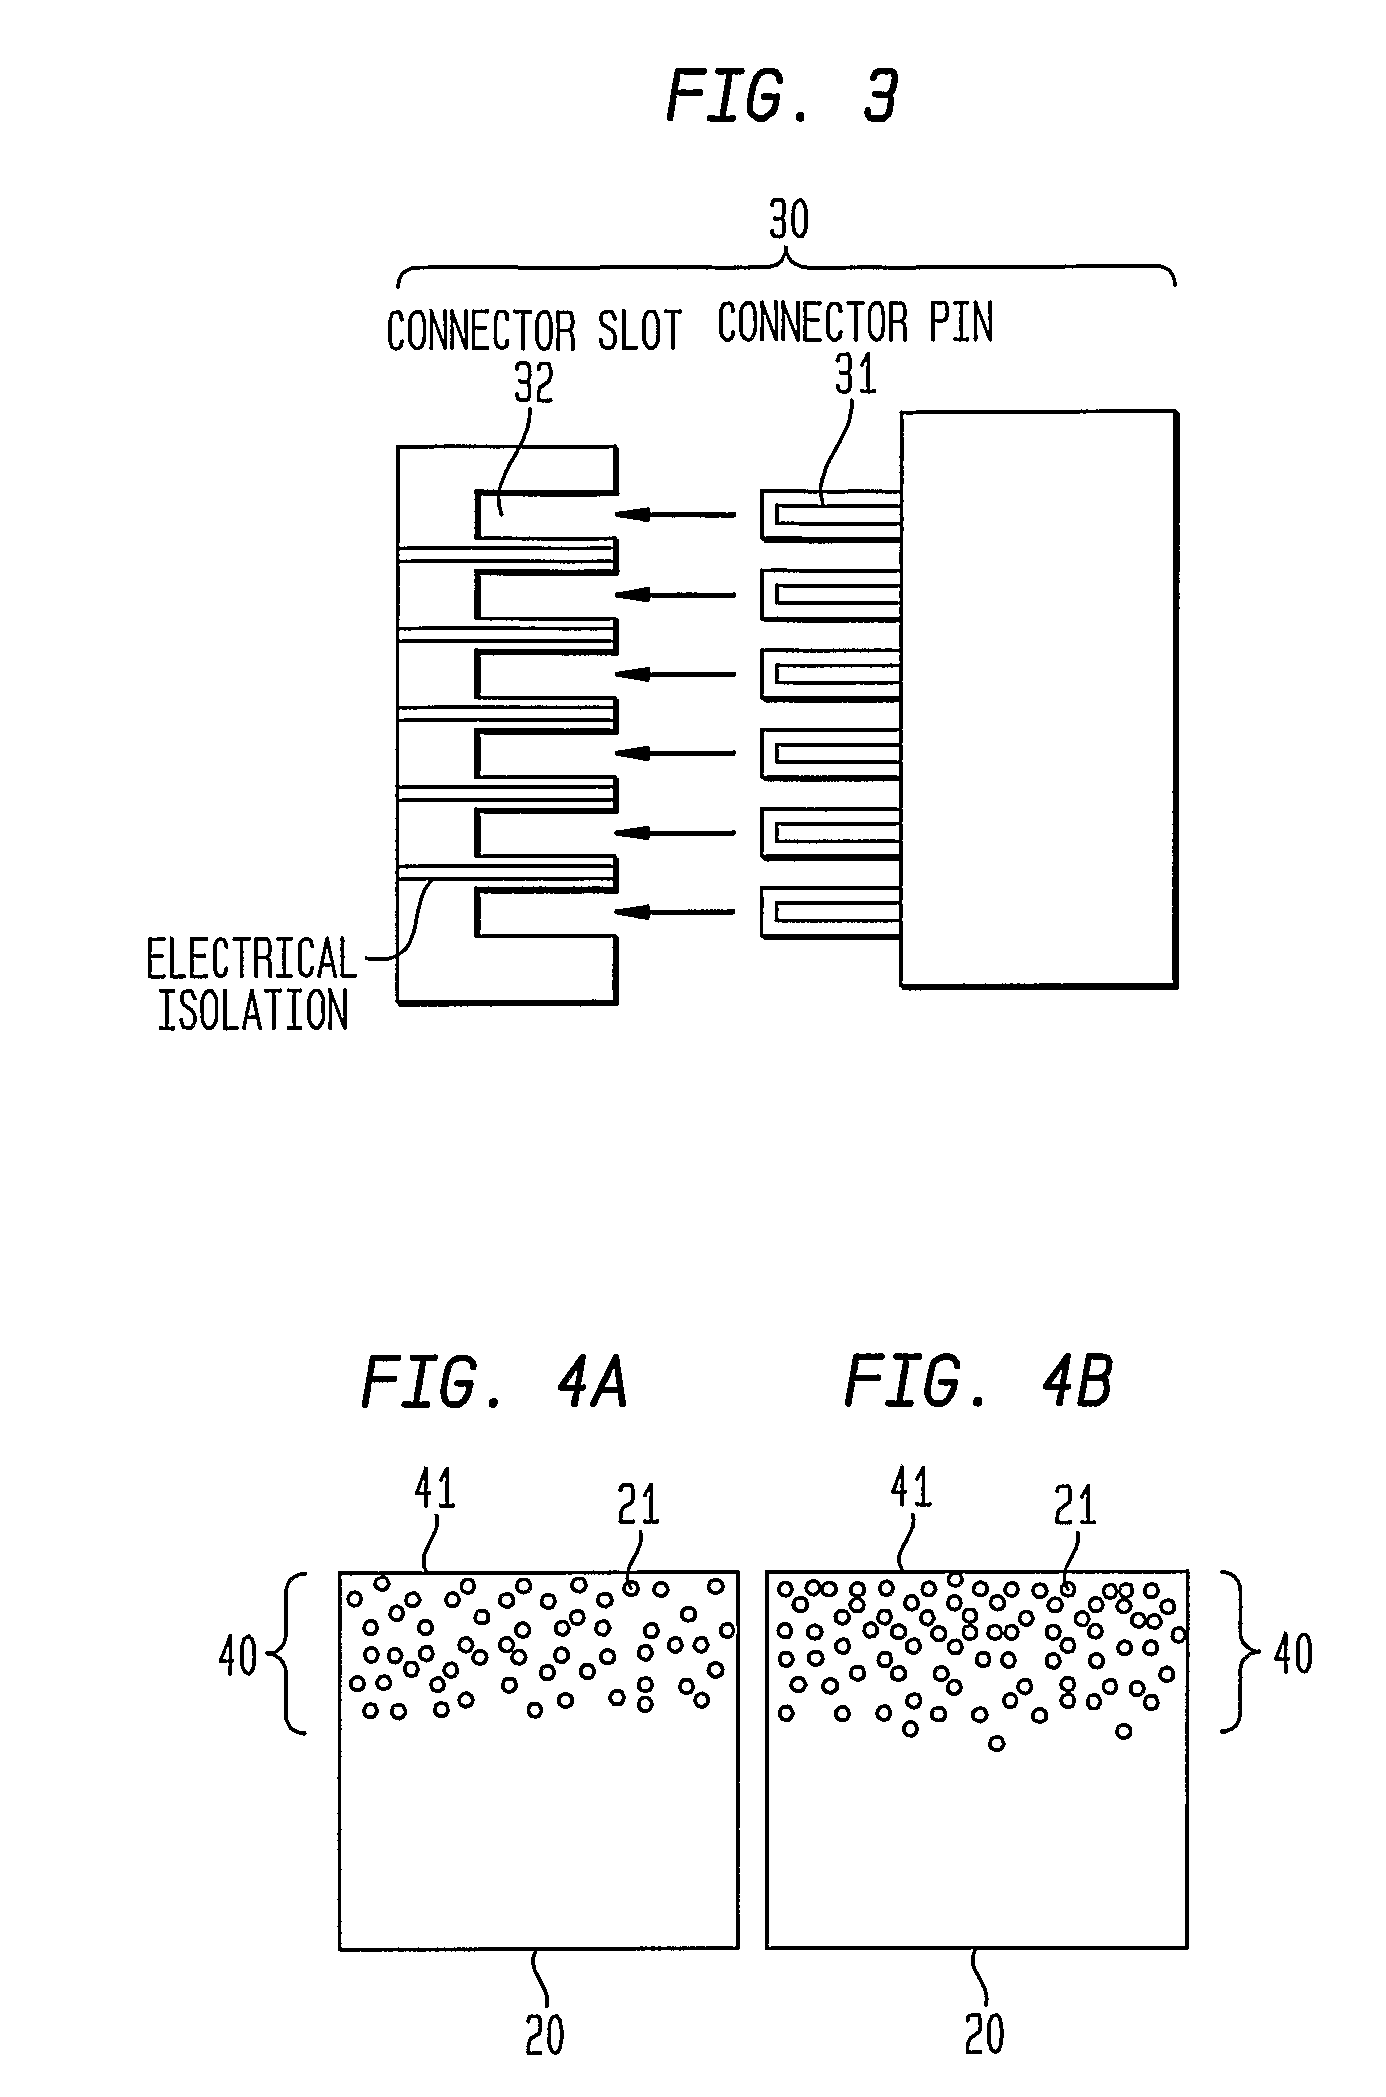 Articles comprising high-electrical-conductivity nanocomposite material and method for fabricating same